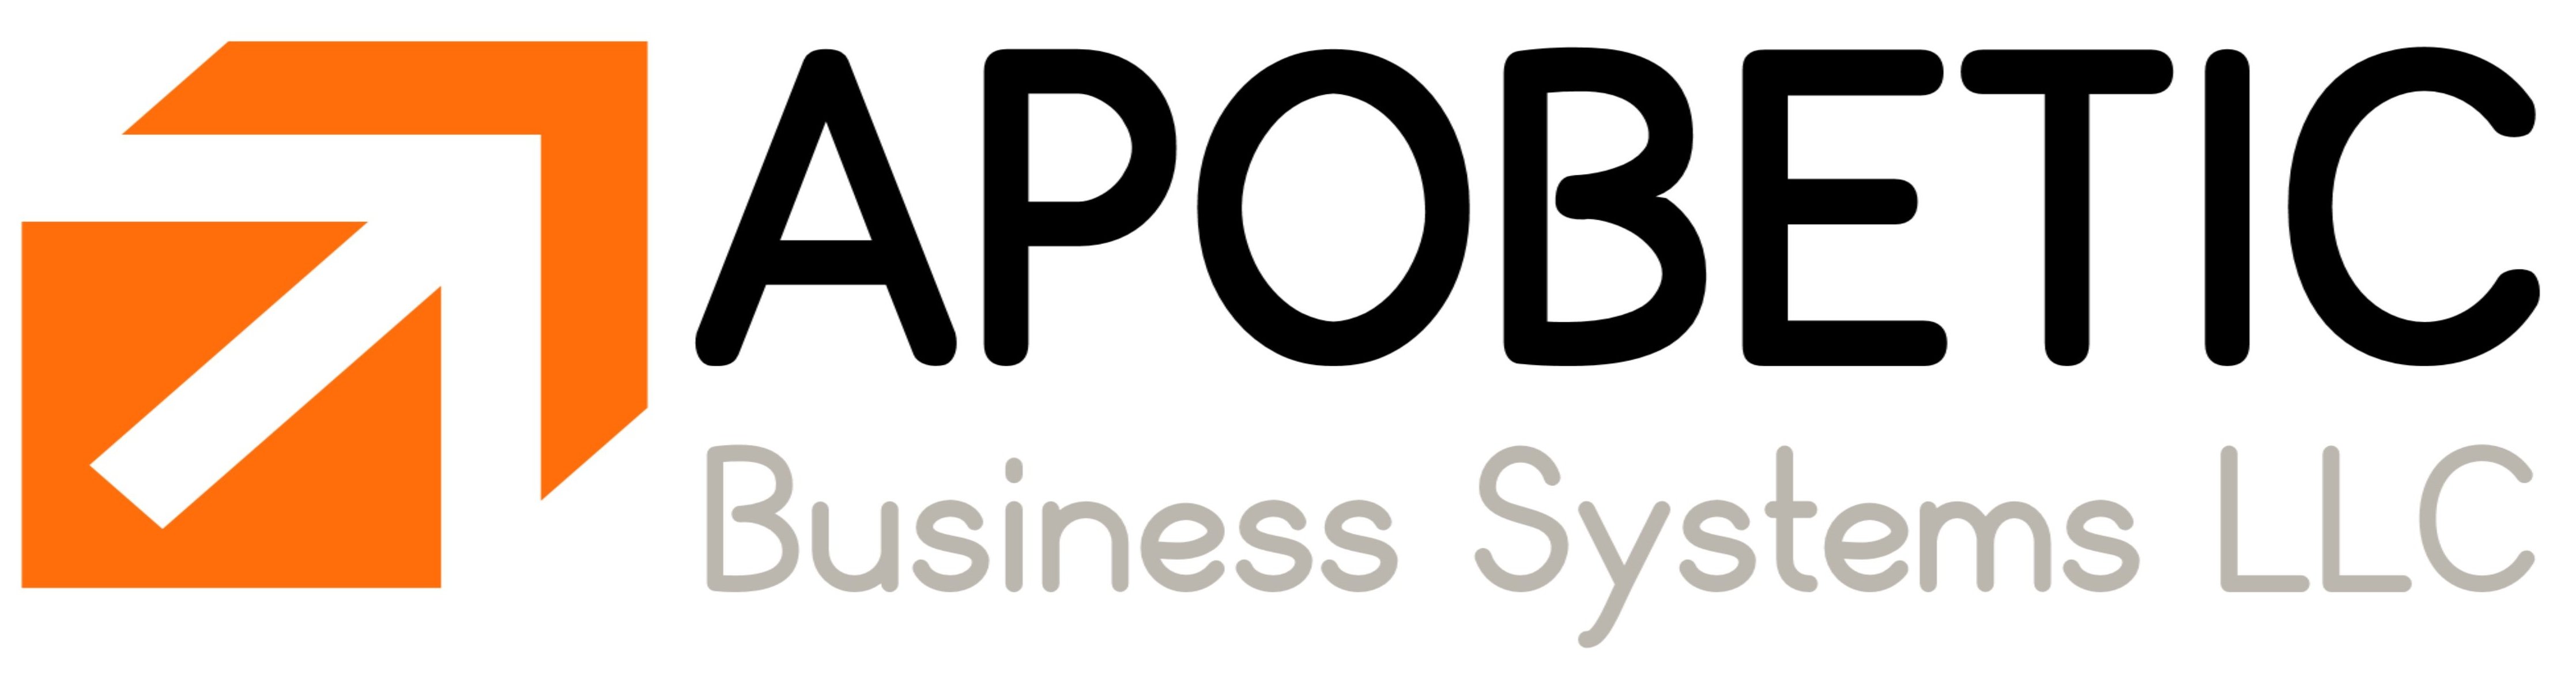 Apobetic Business Systems LLC